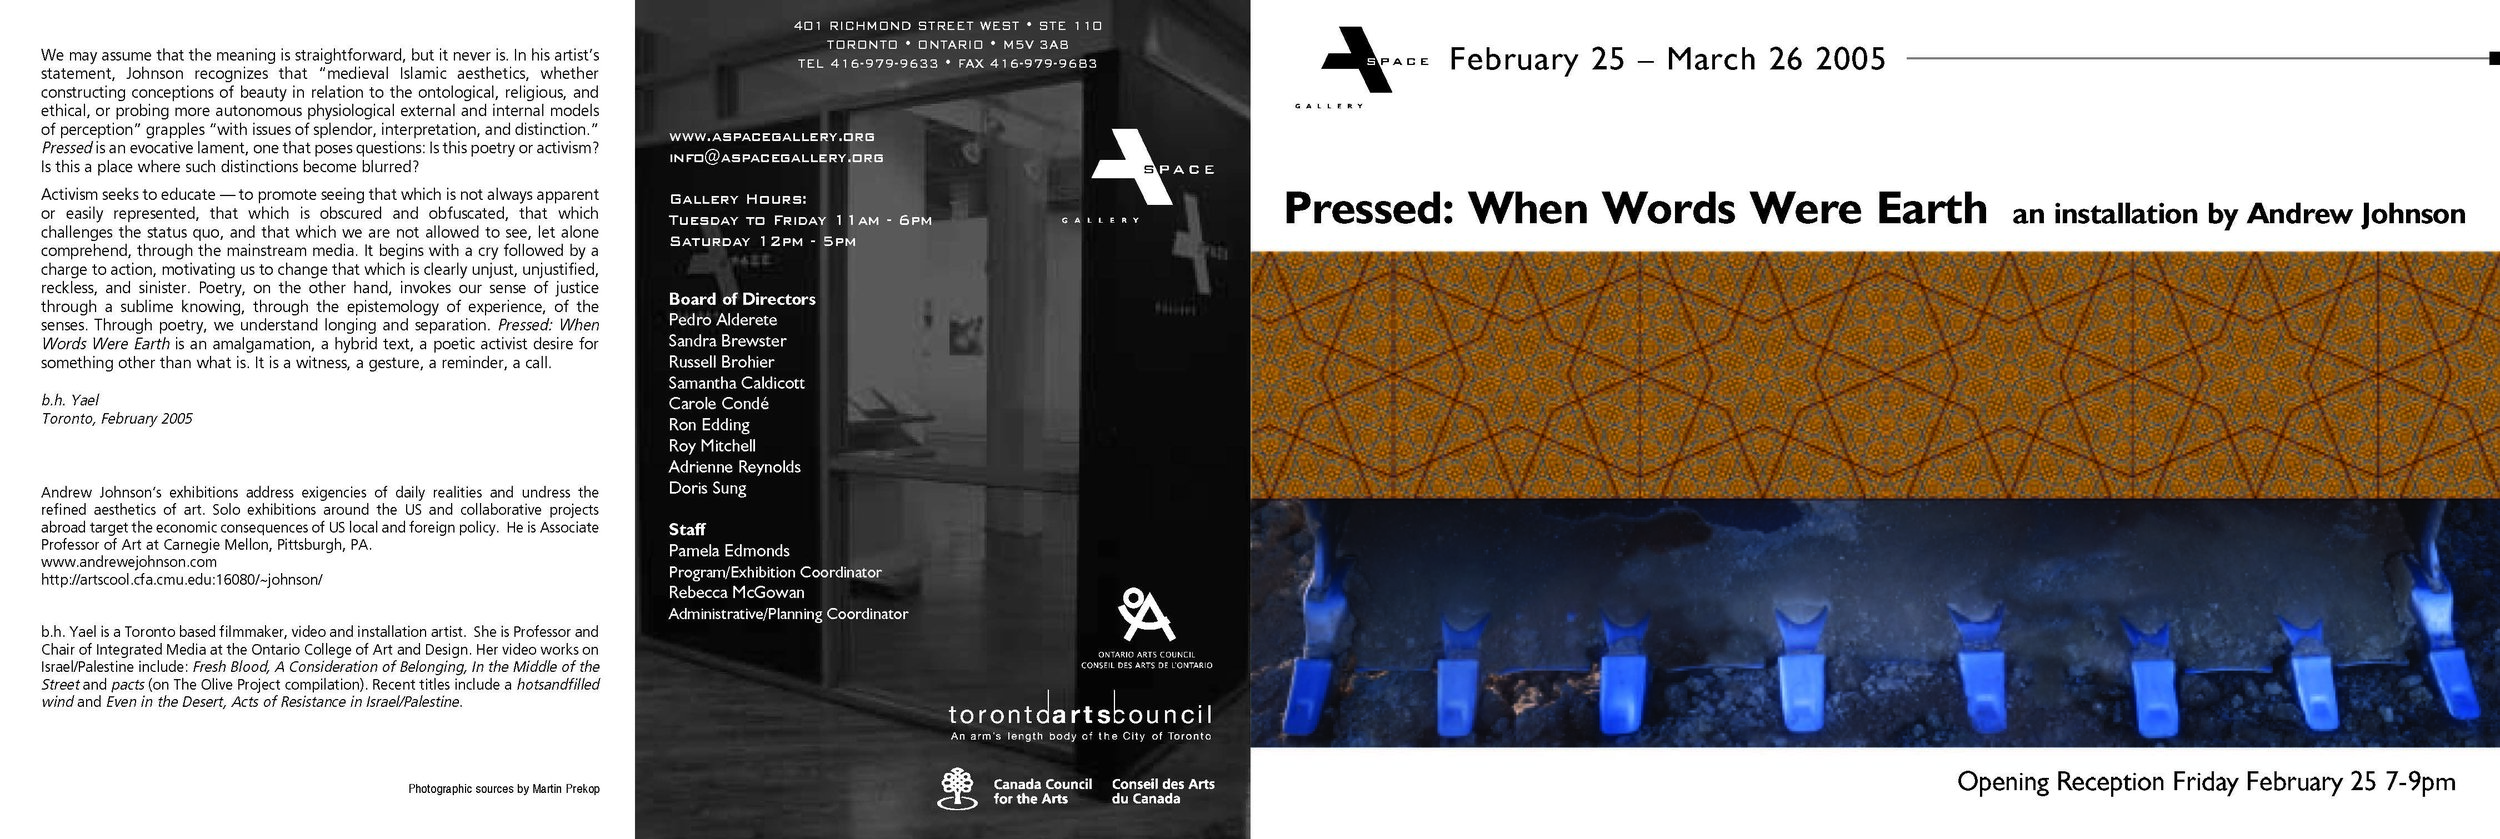 ANNOUNCEMENT FOR PRESSED AT A SPACE